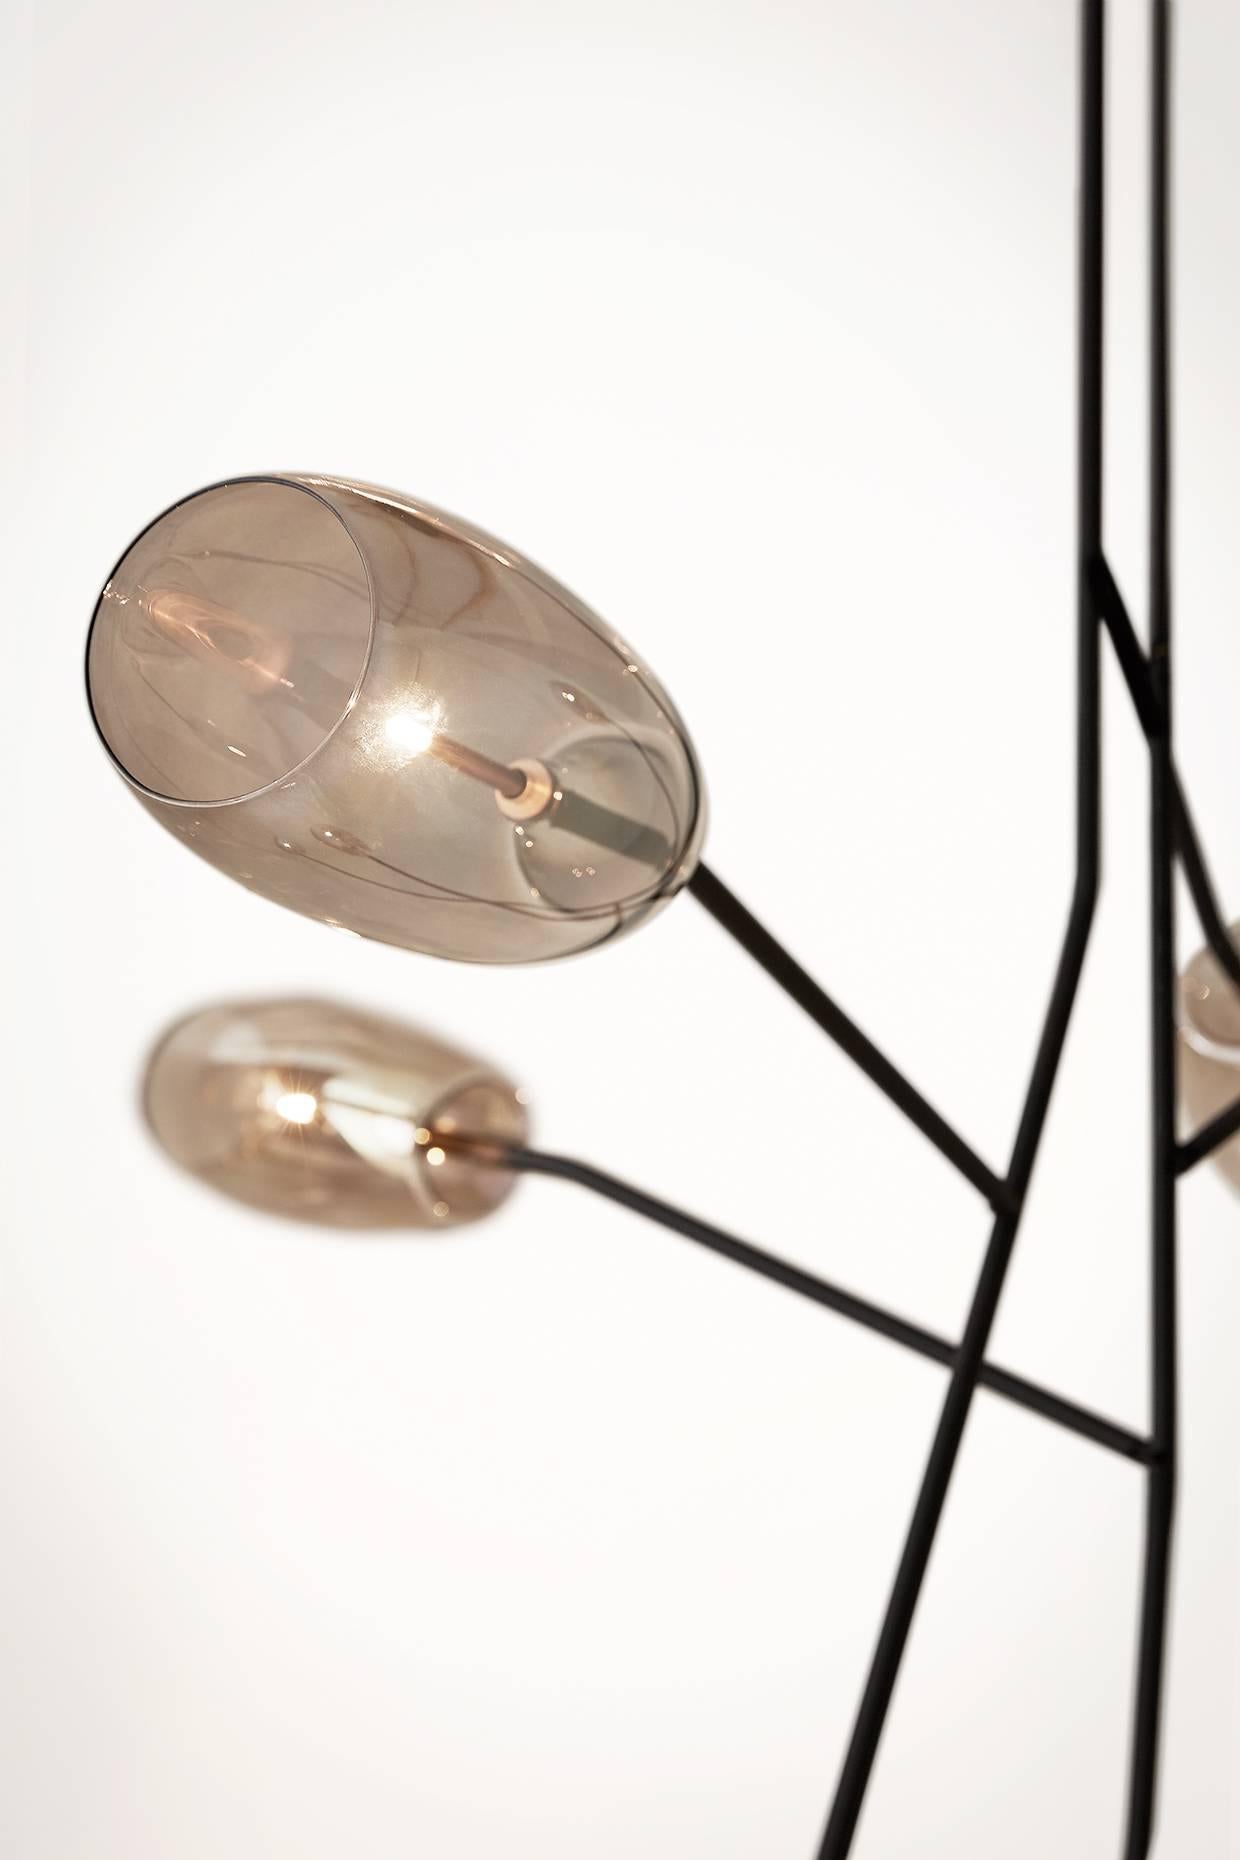 Diantha chandelier by Massimo Castagna for Gallotti & Radice. 

Hanging lamp with LED light (20 Watt). Mouth blown and painted glass. Bronzed black metal parts.

Three sizes or orientations available: 

Horizontal 67 x 43.5 x 43.5 H
Vertical